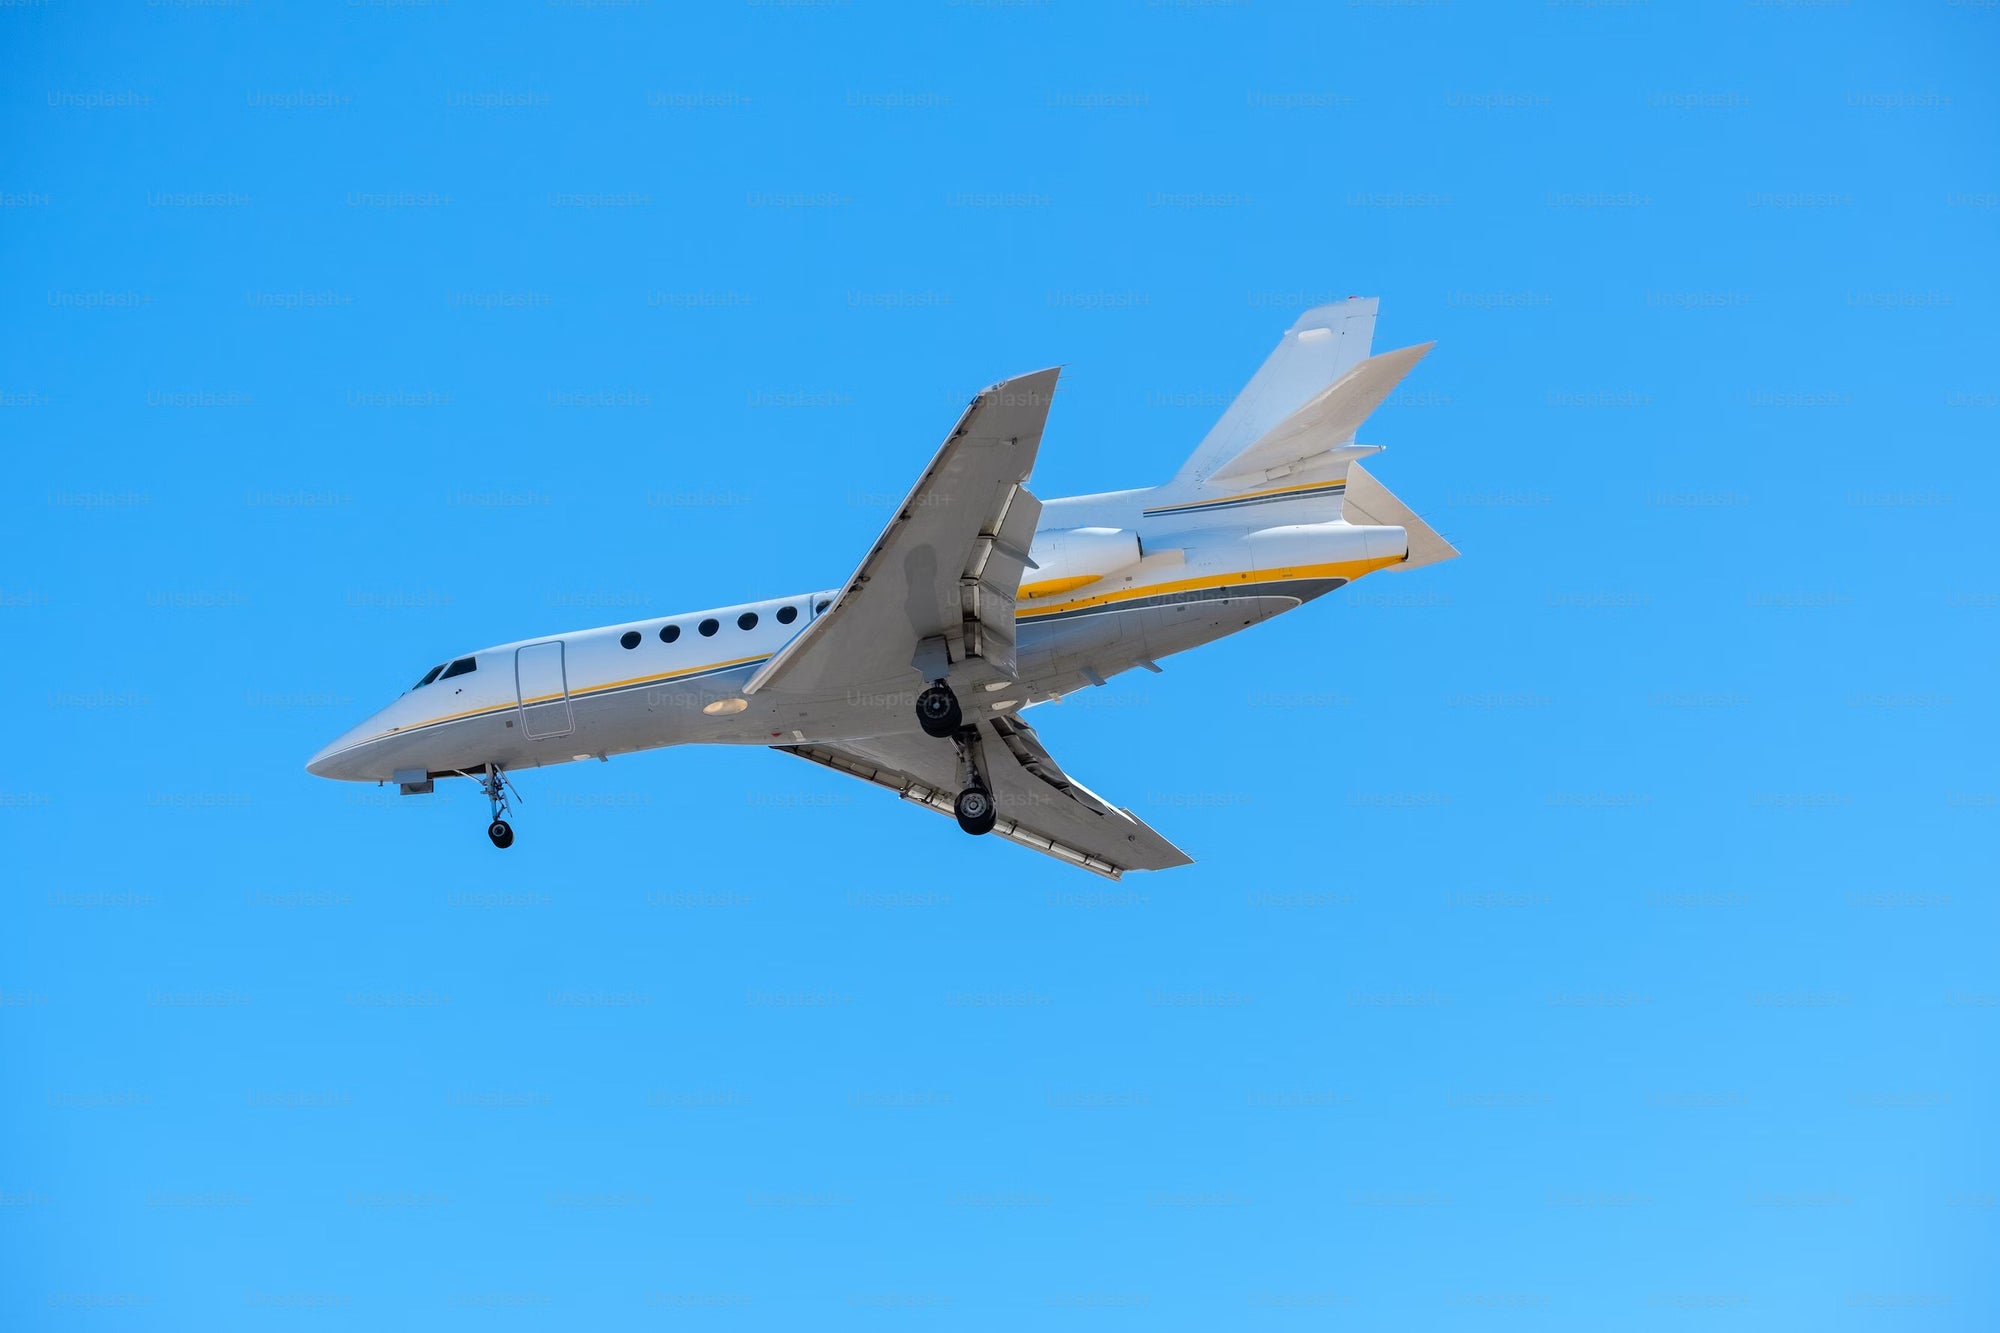 THE PRIMARY RISE OF PRIVATE JET CHARTERS